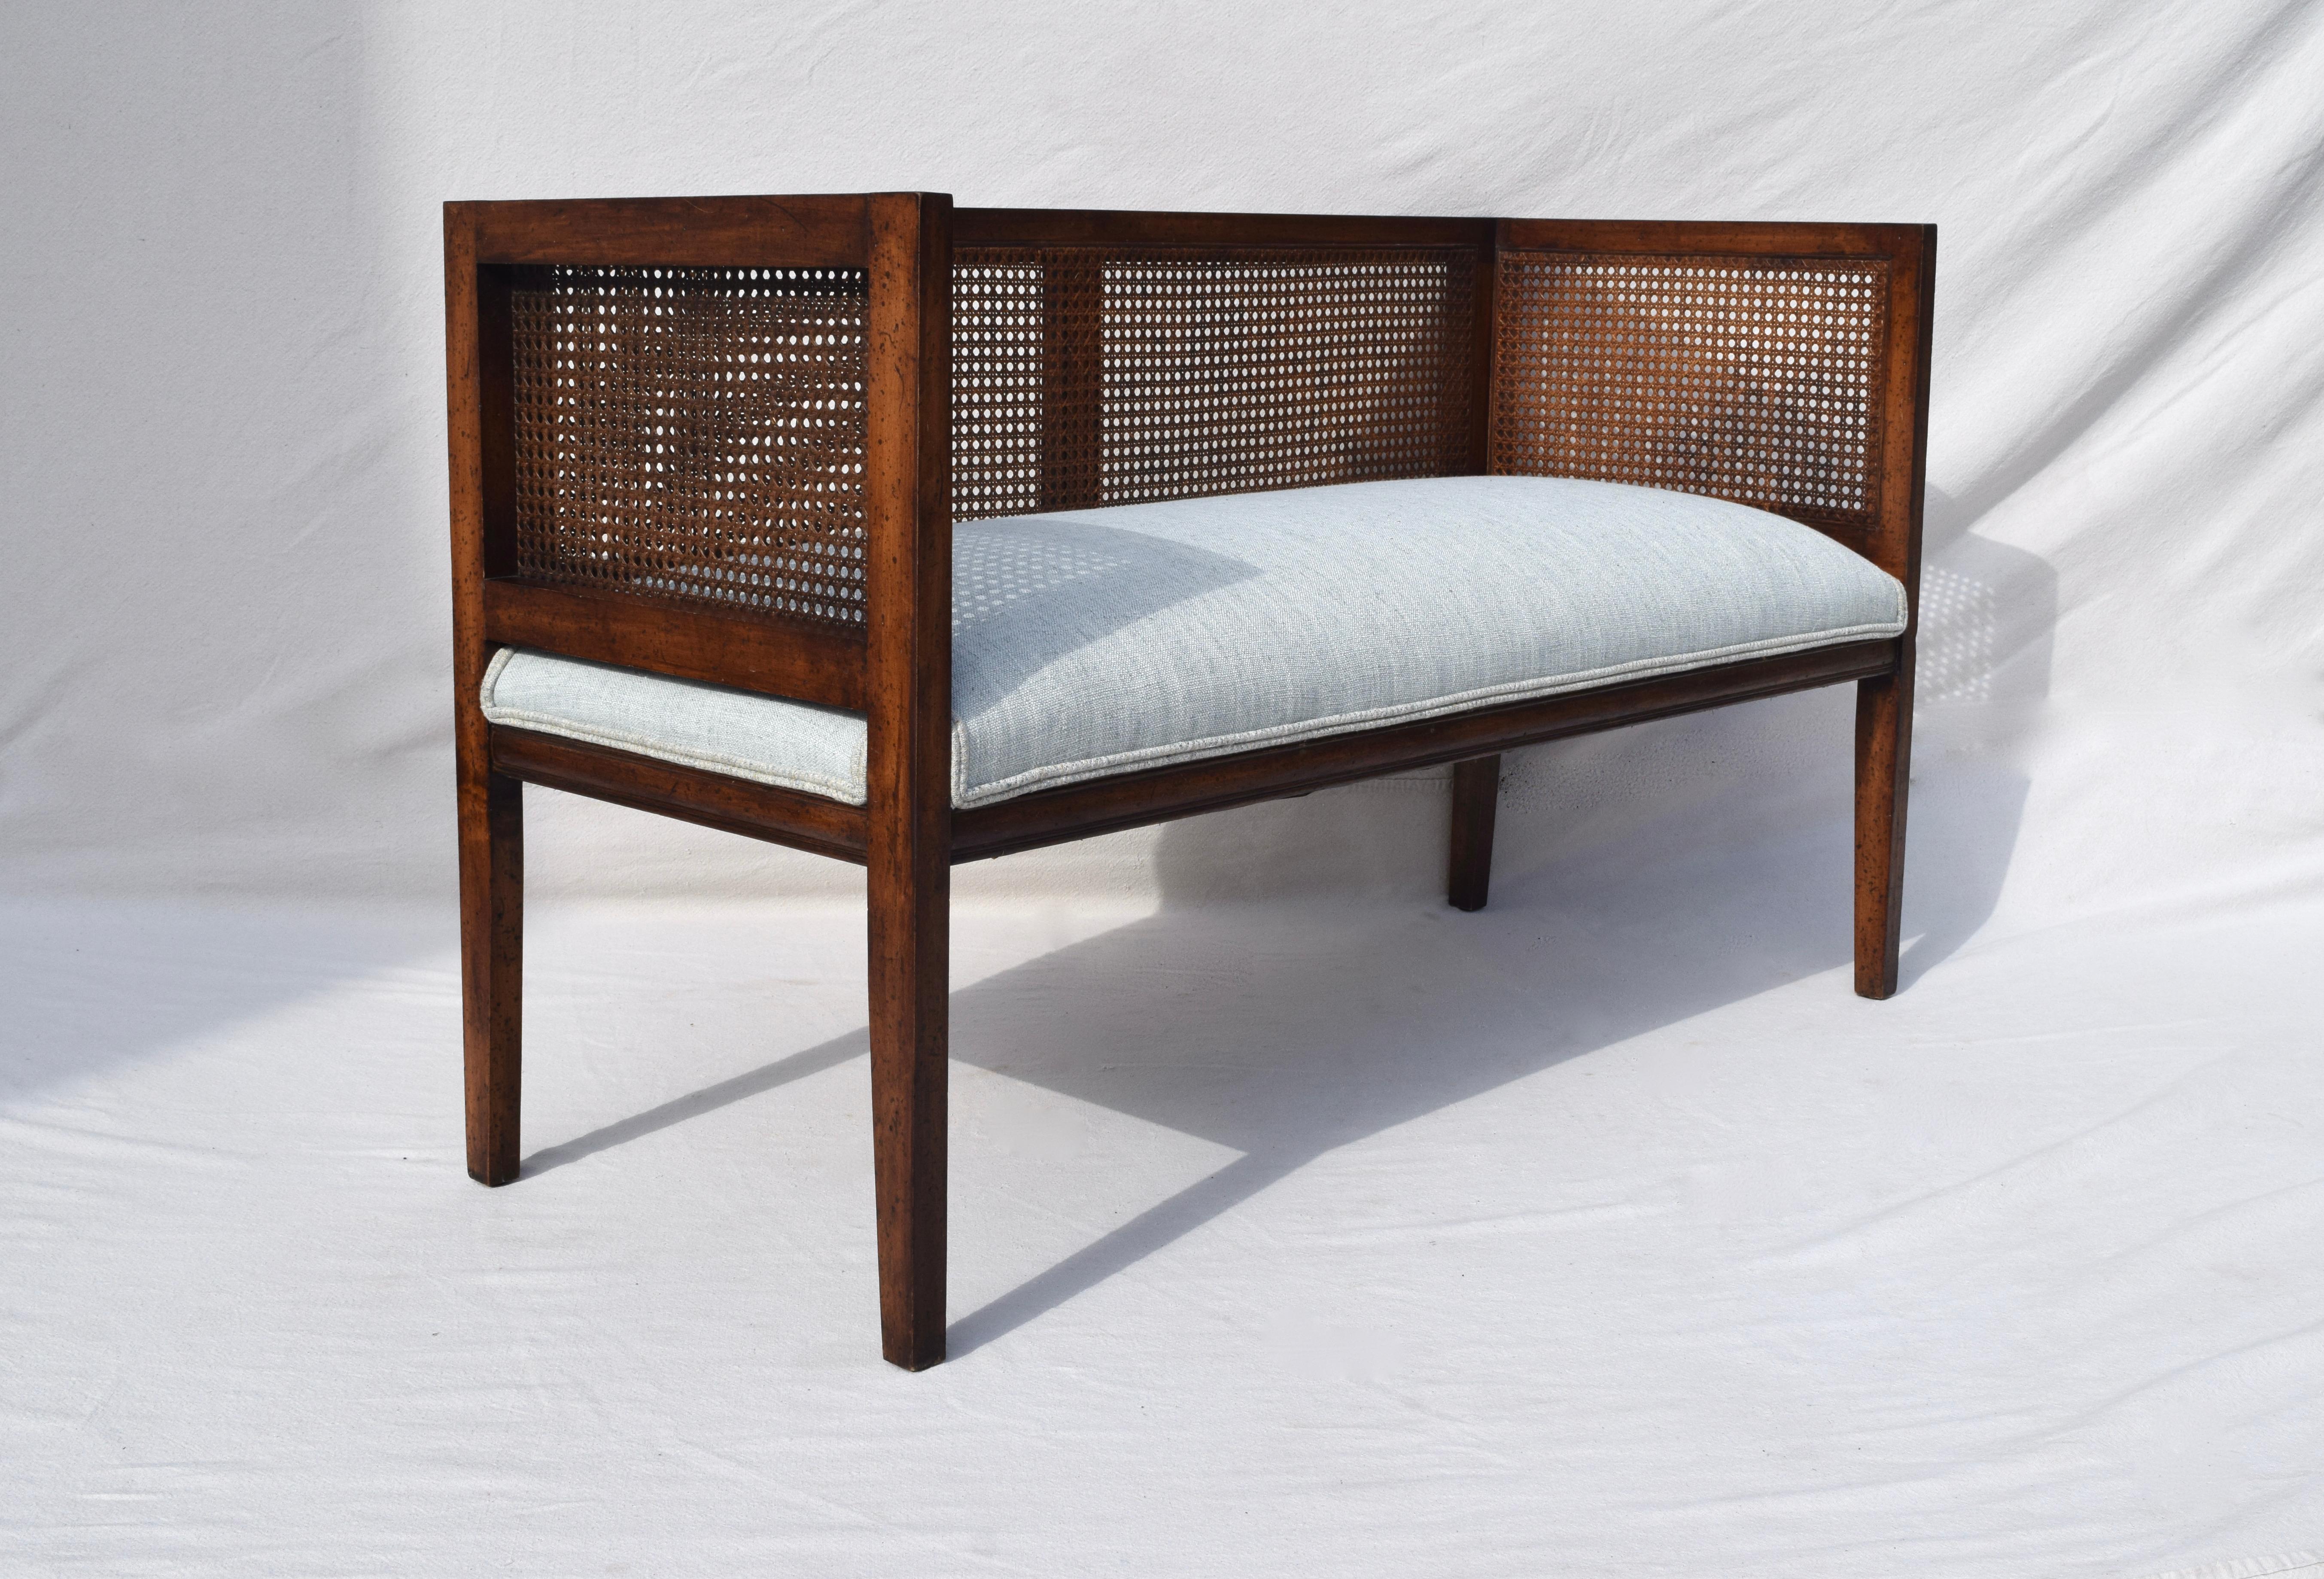 American 1950s Walnut Window Bench in the Manner of Edward Wormley for Dunbar